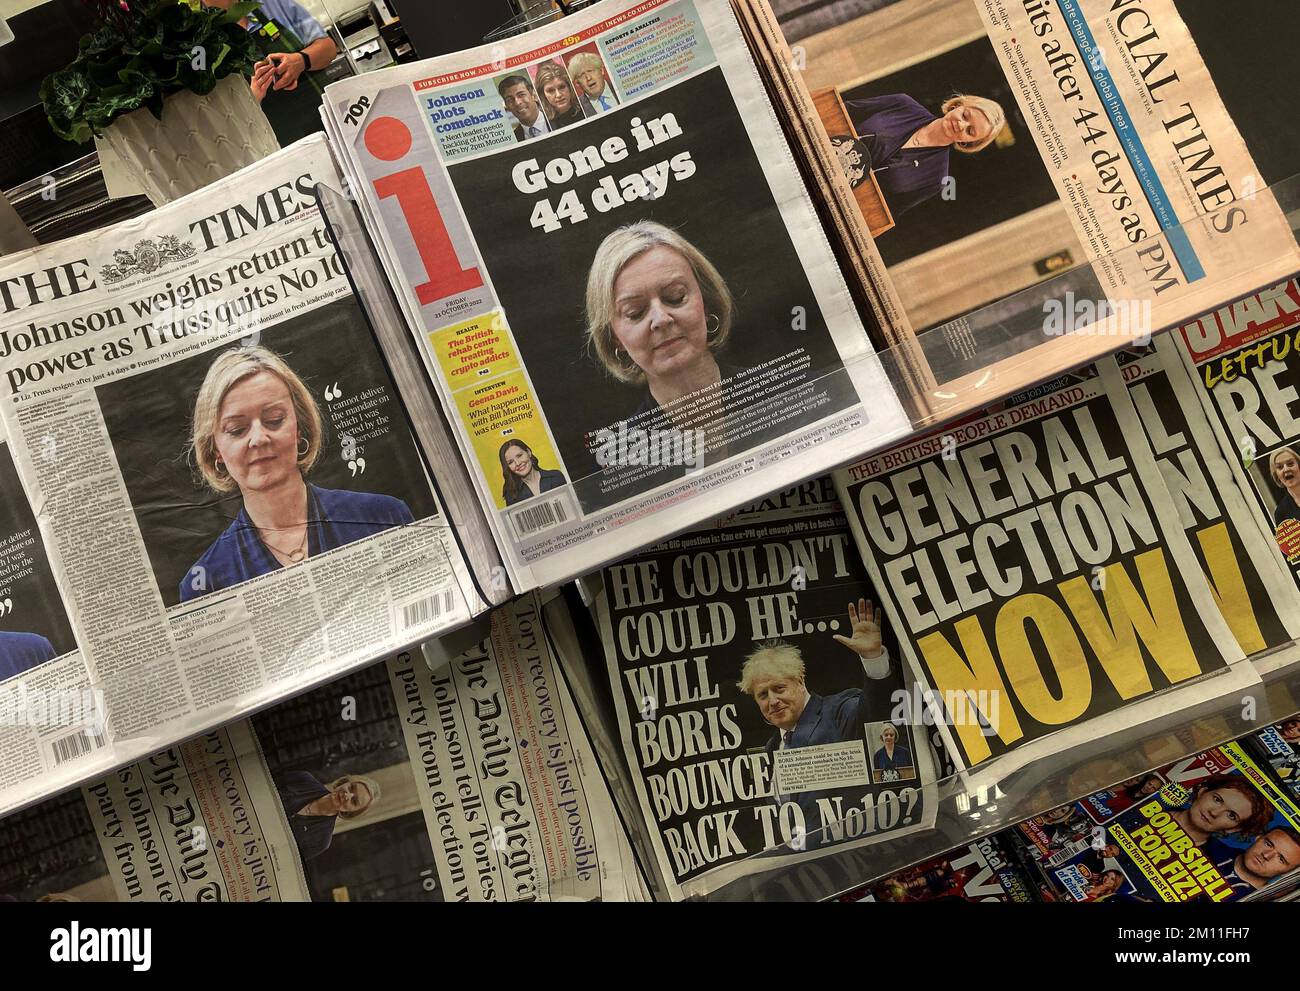 Prime Minister Liz Truss resigns. After just 44 days in Downing Street The shortest Premiership ever in Britain. Liz Truss resigns on 20 October. Newspapers the following day report the news. 21 October 2022 Stock Photo